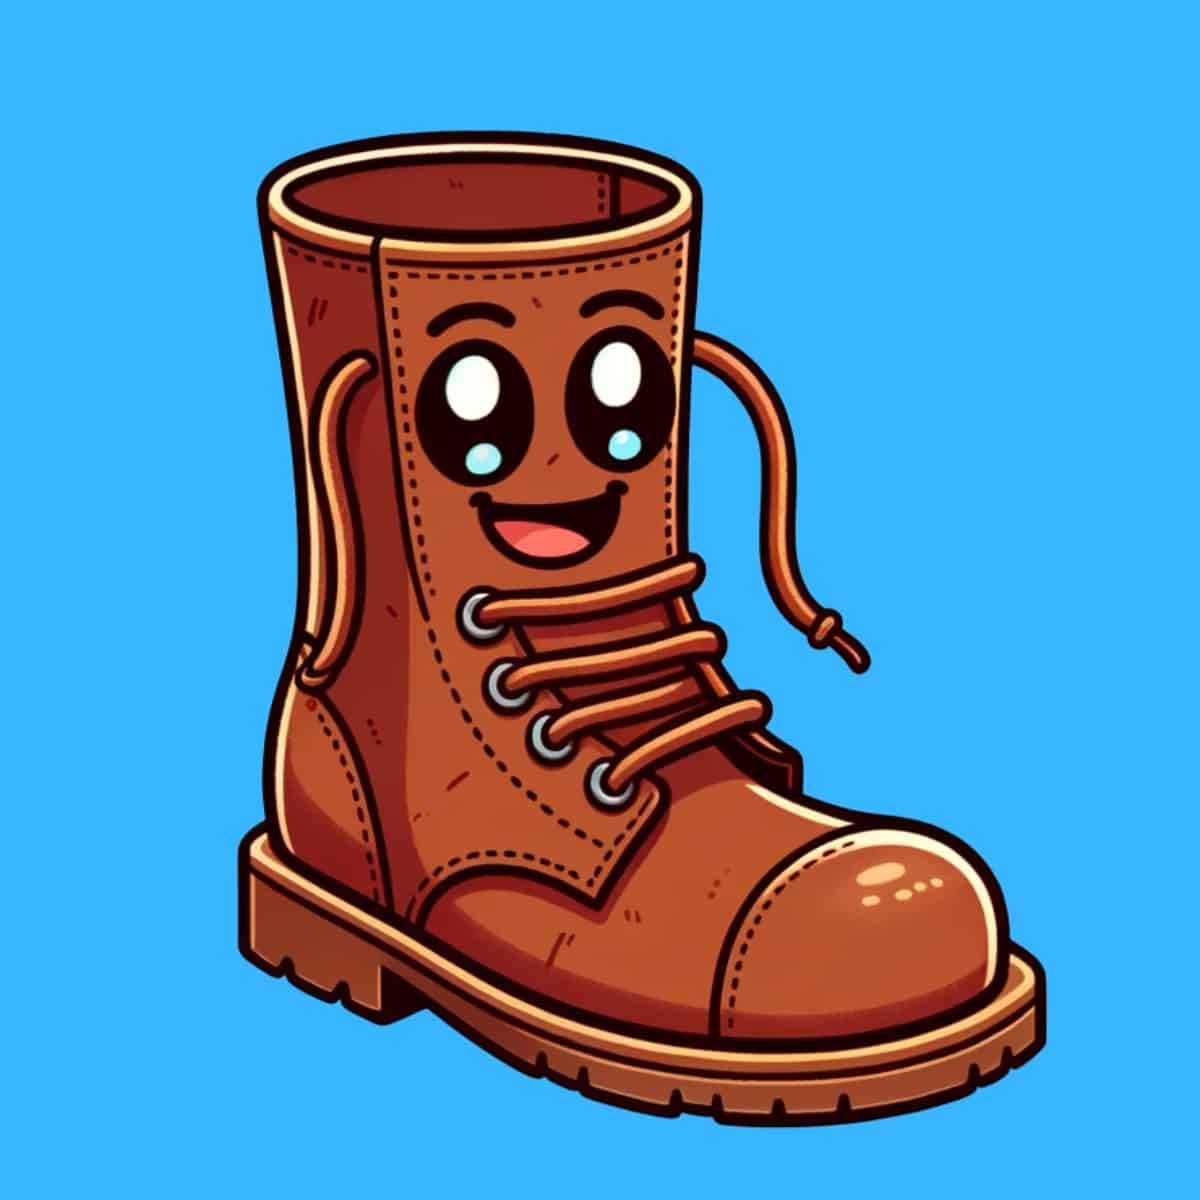 A cartoon graphic of a smiling brown boot on a blue background.